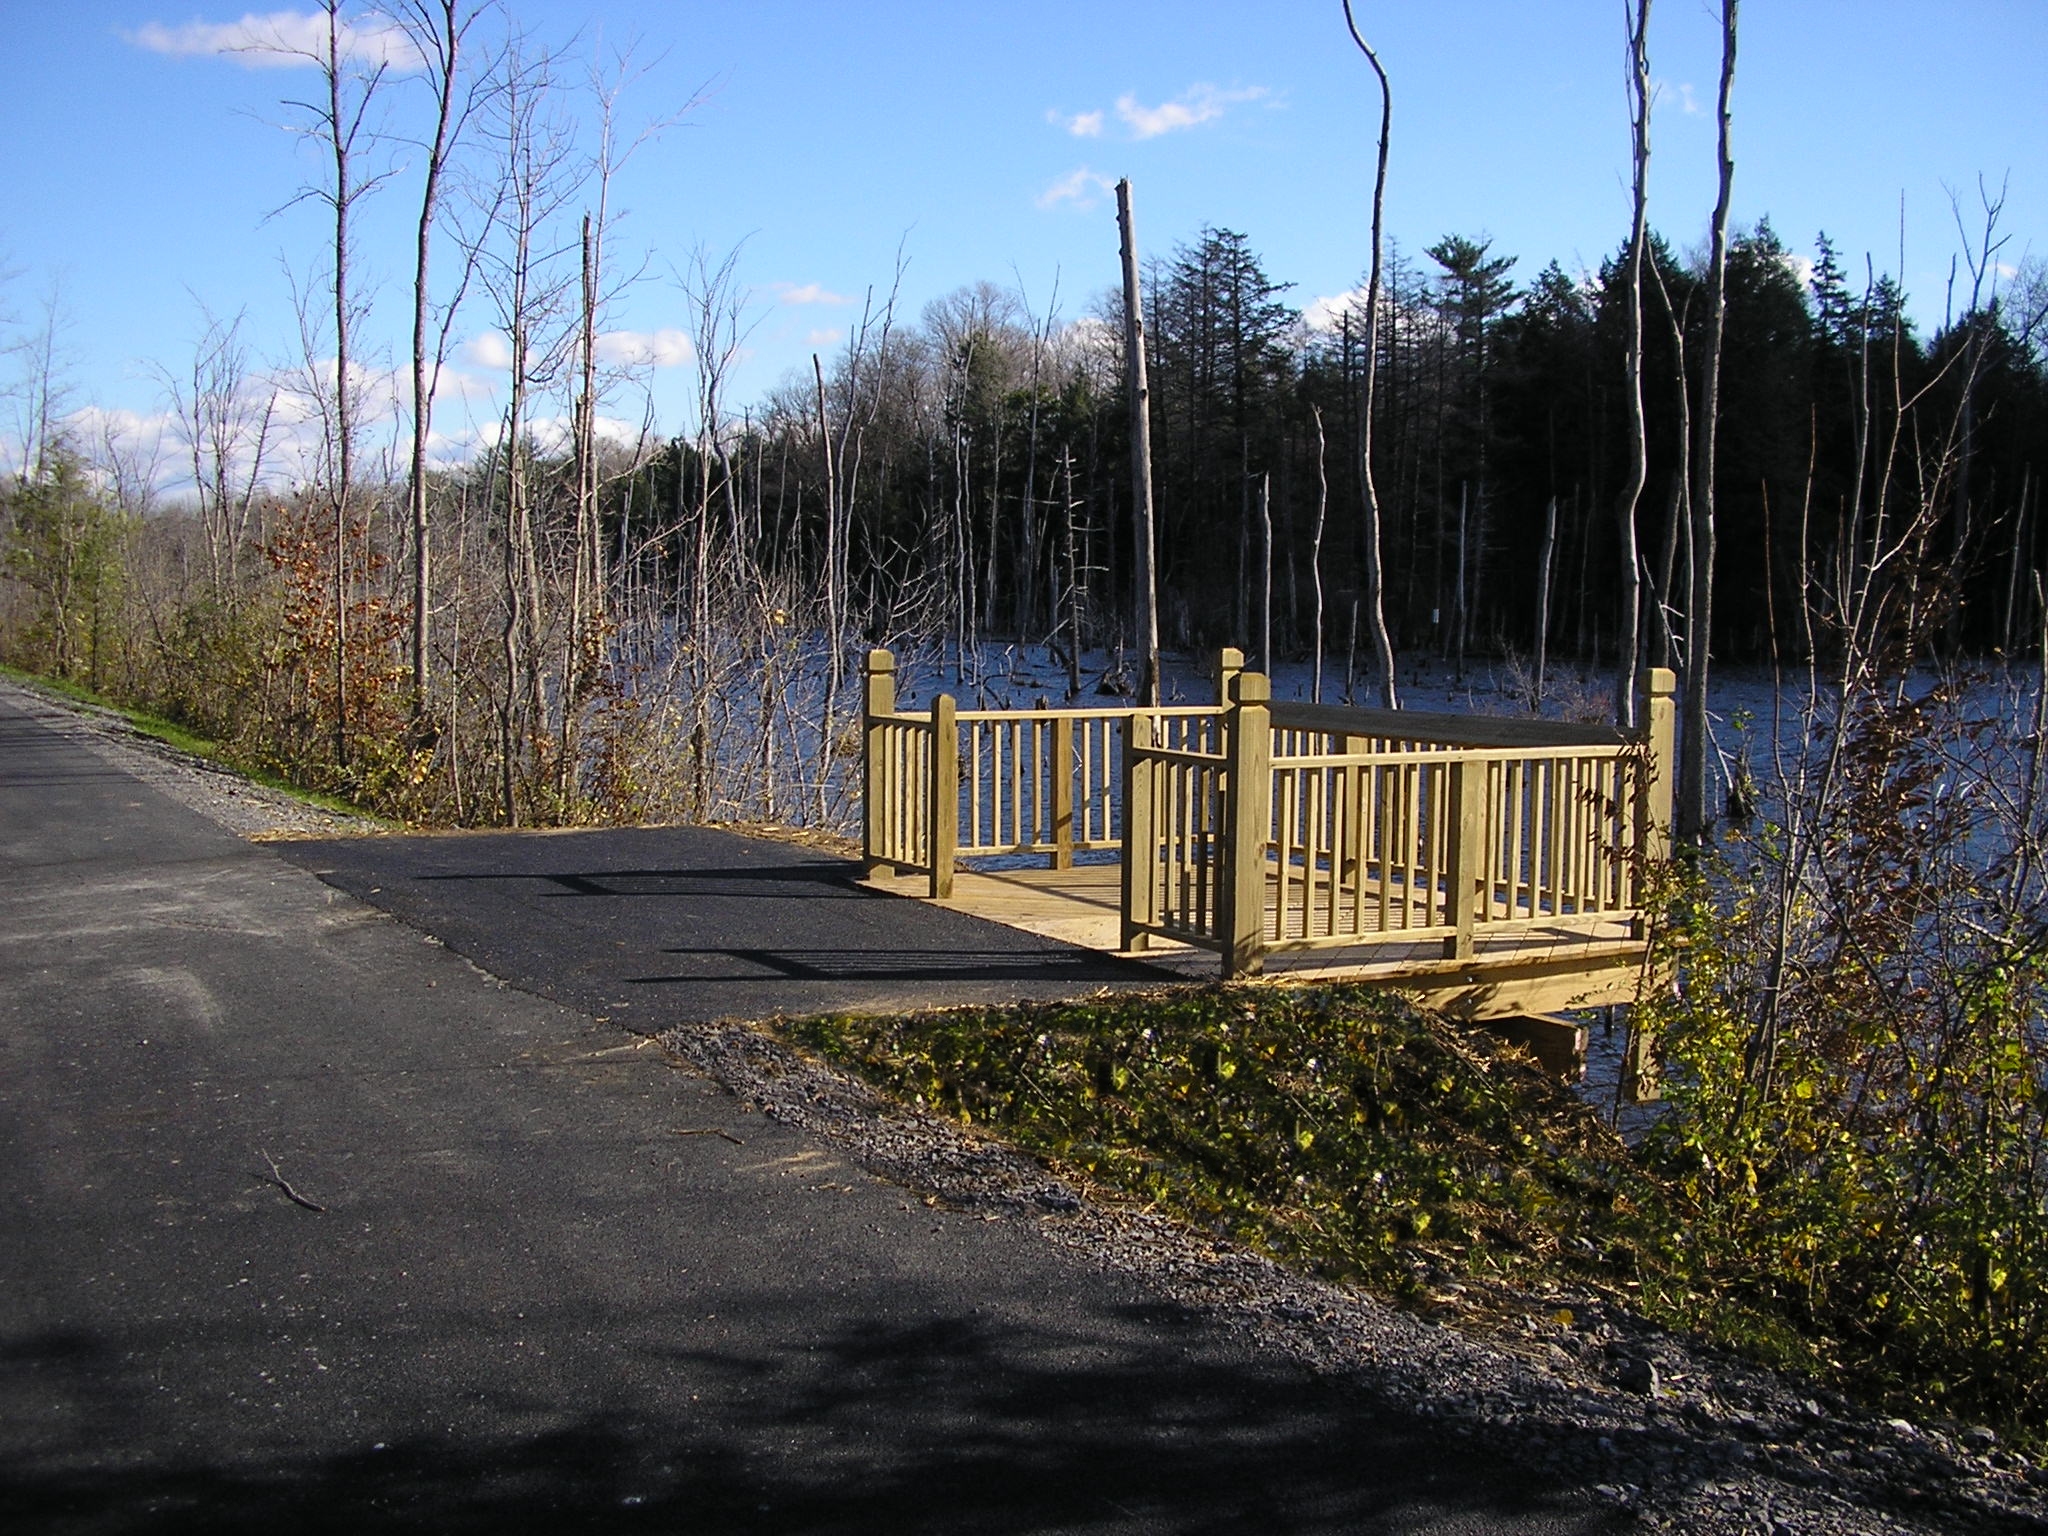 A SECOND TRAILHEAD PARKING AREA HAS BEEN PROVIDED AT